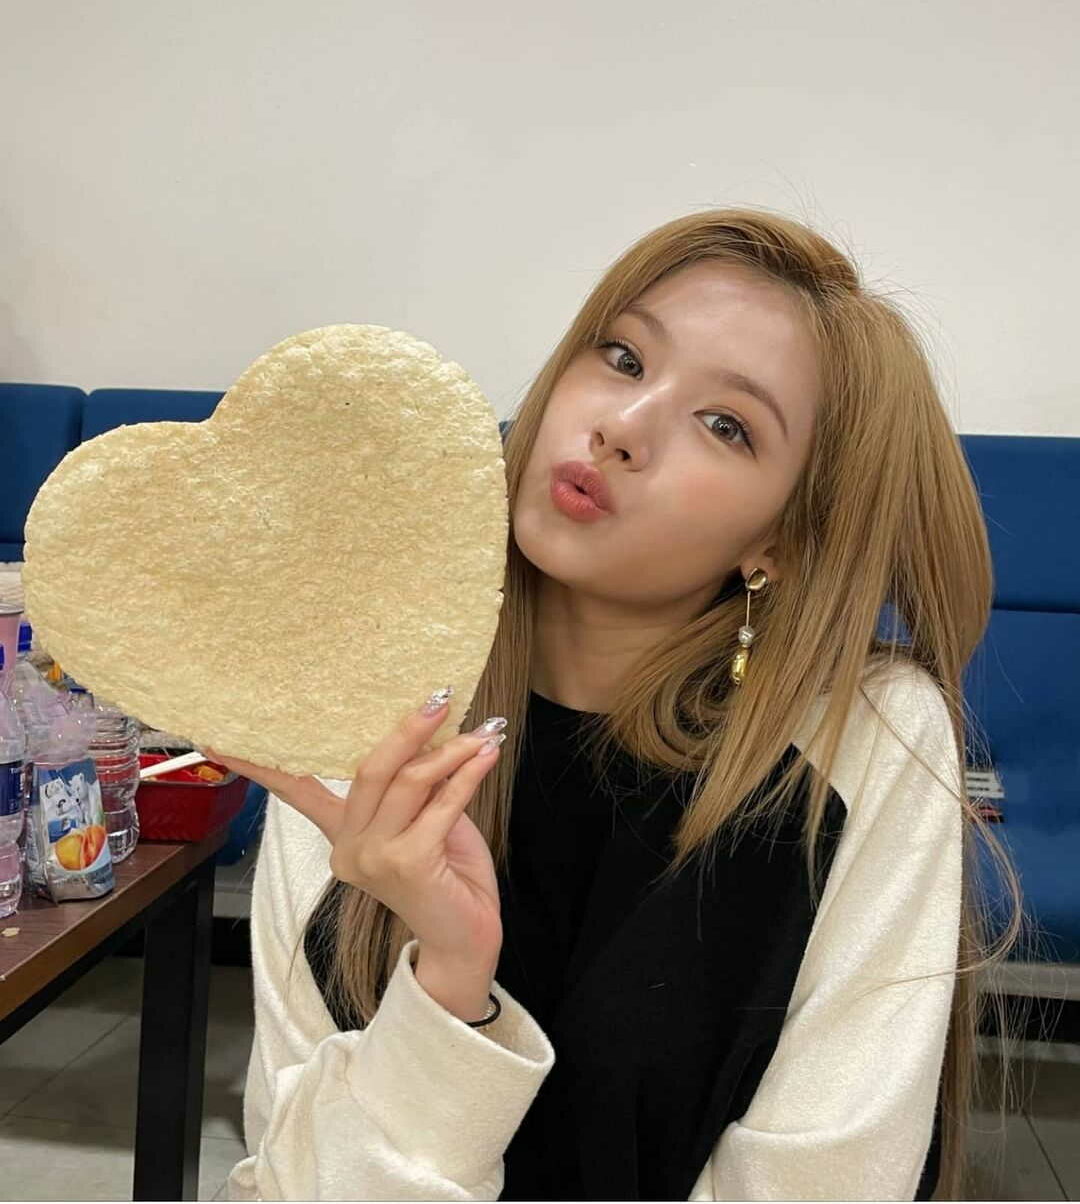 Sana TWICE - Biography, Profile, Facts, and Career